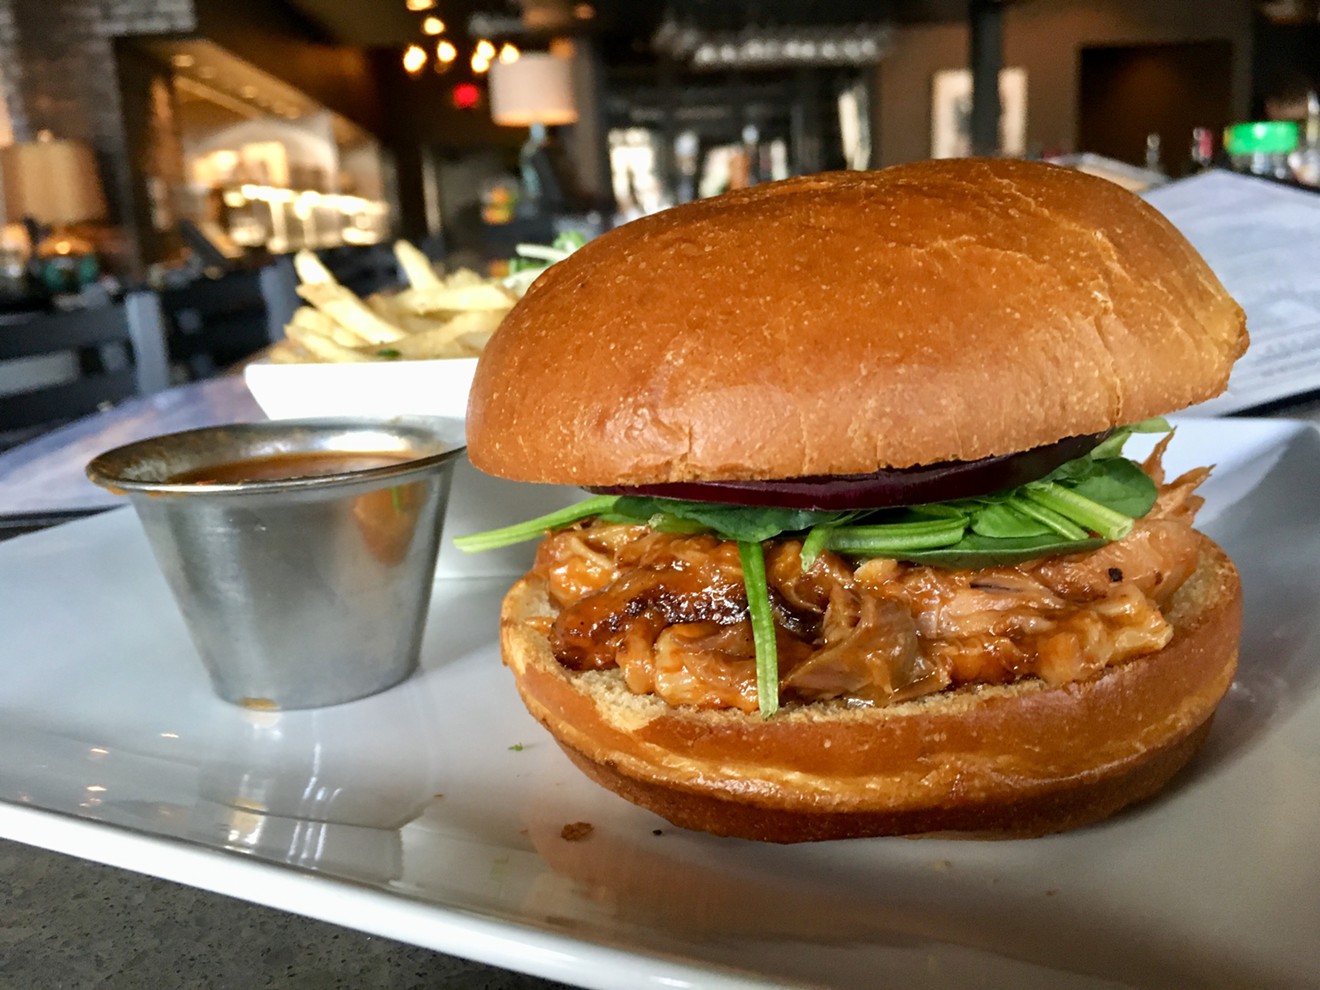 The simple pork osso bucco sandwich at Terilli's for $13.80